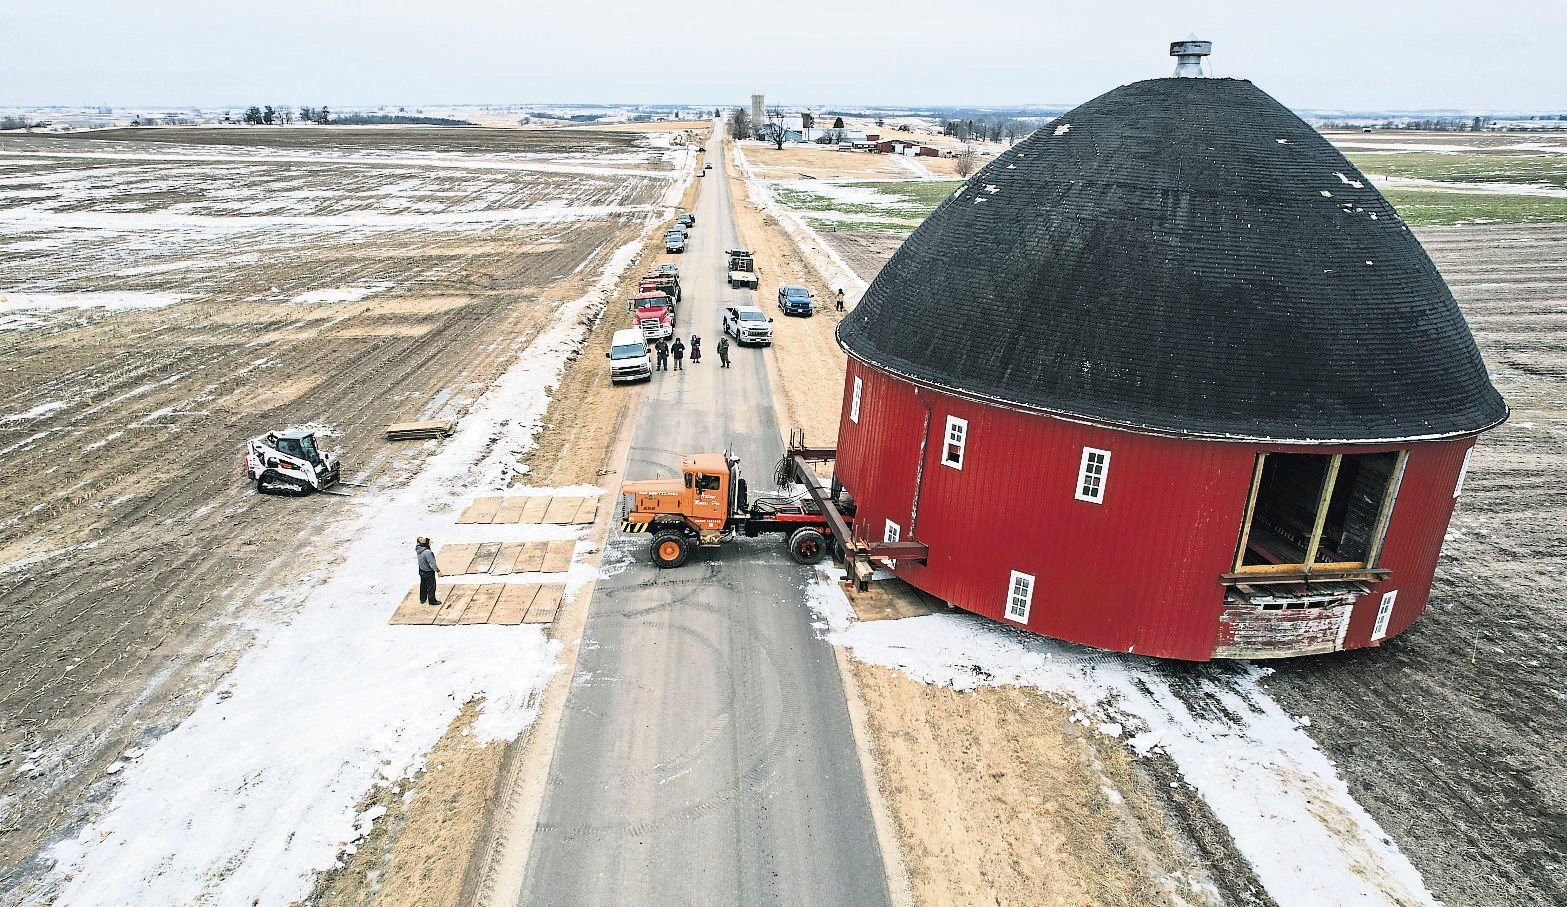 Crews work on moving a 60-foot round barn across Old Potosi Road in Lancaster, Wis., on Thursday. Vesperman Farms moved the barn to its property a few miles away.    PHOTO CREDIT: Dave Kettering